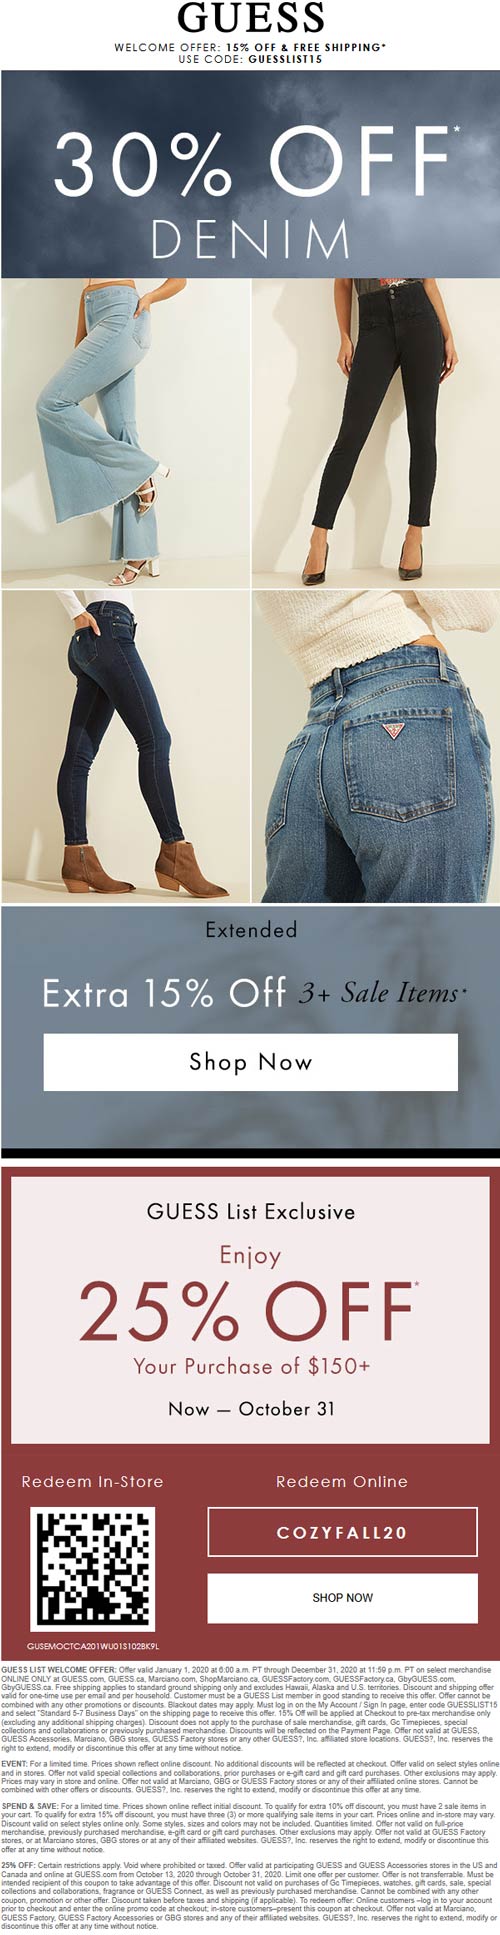 30 off denim & 25 off 150 at GUESS, or online via promo code